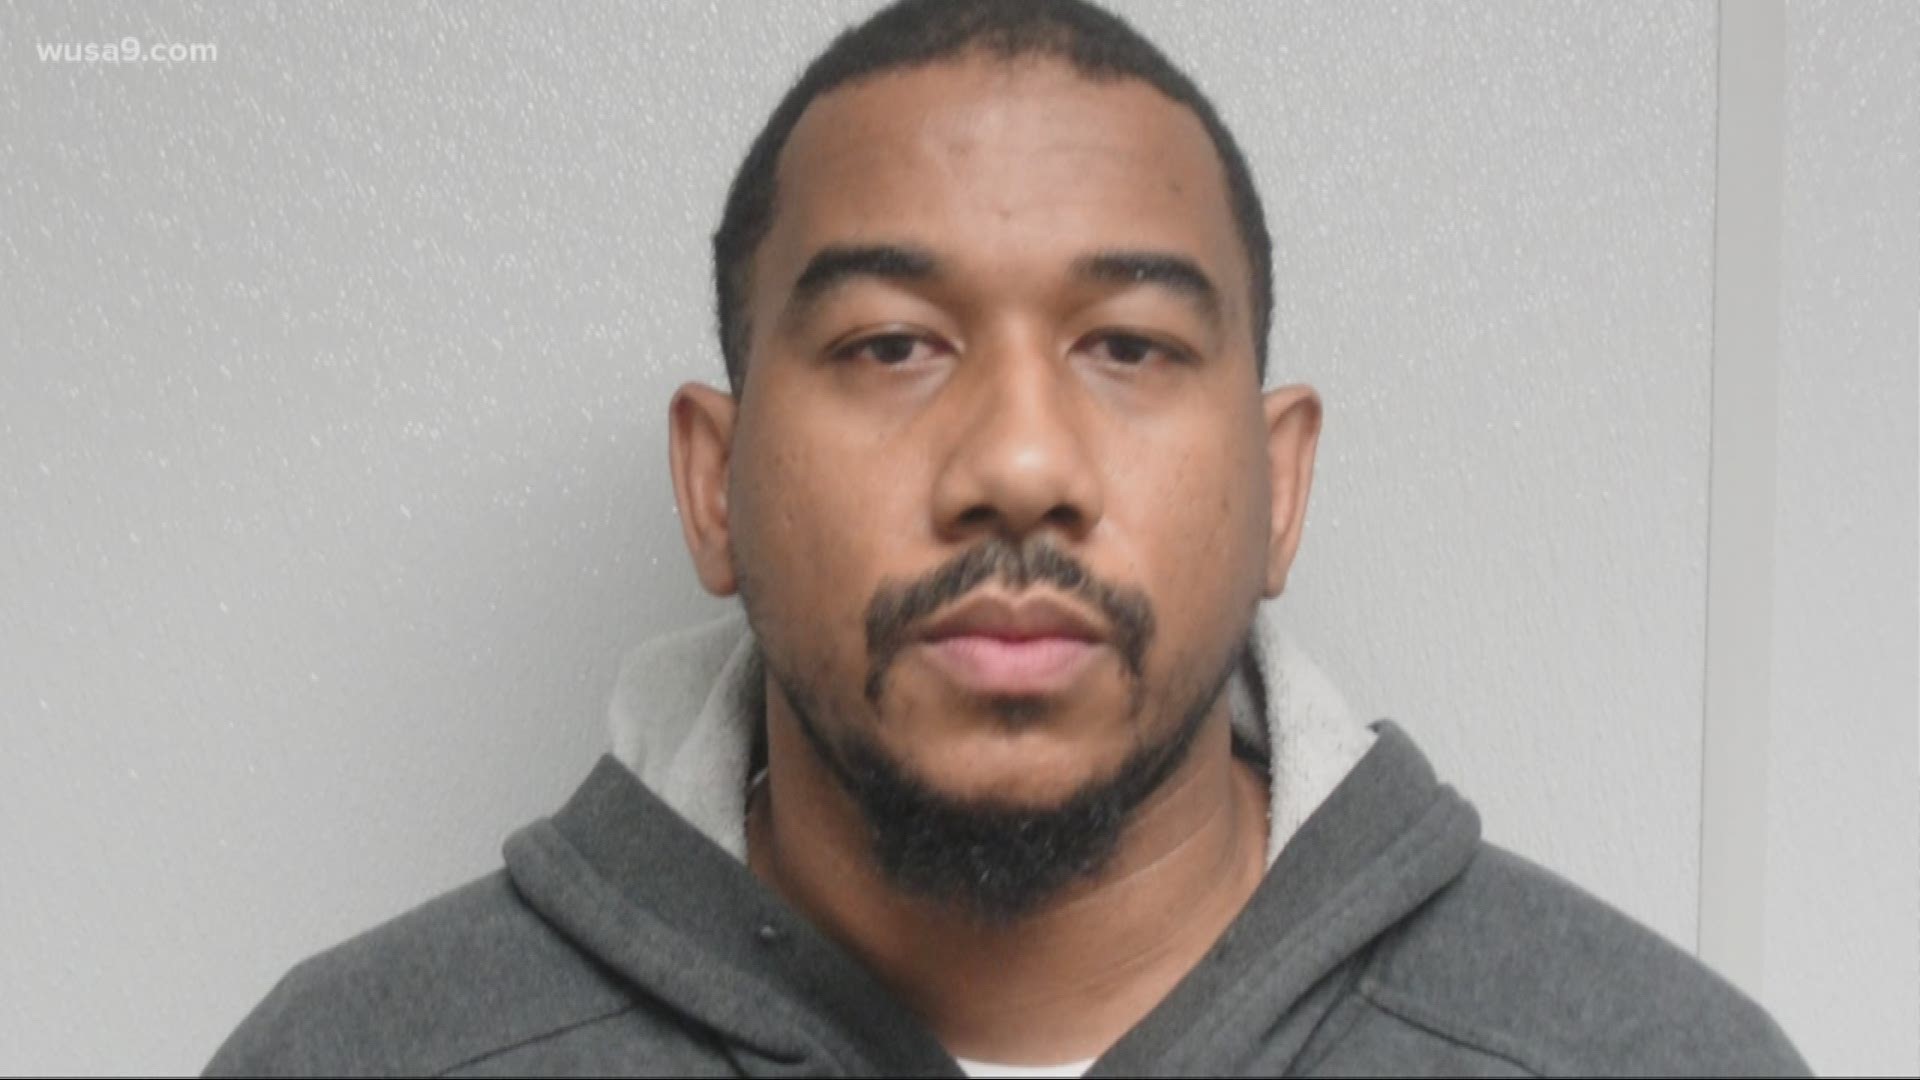 A 35-year-old man has been accused of sexually assaulting three teenage girls, by luring them after giving them alcoholic drinks that may have been laced, Prince George's County police said.